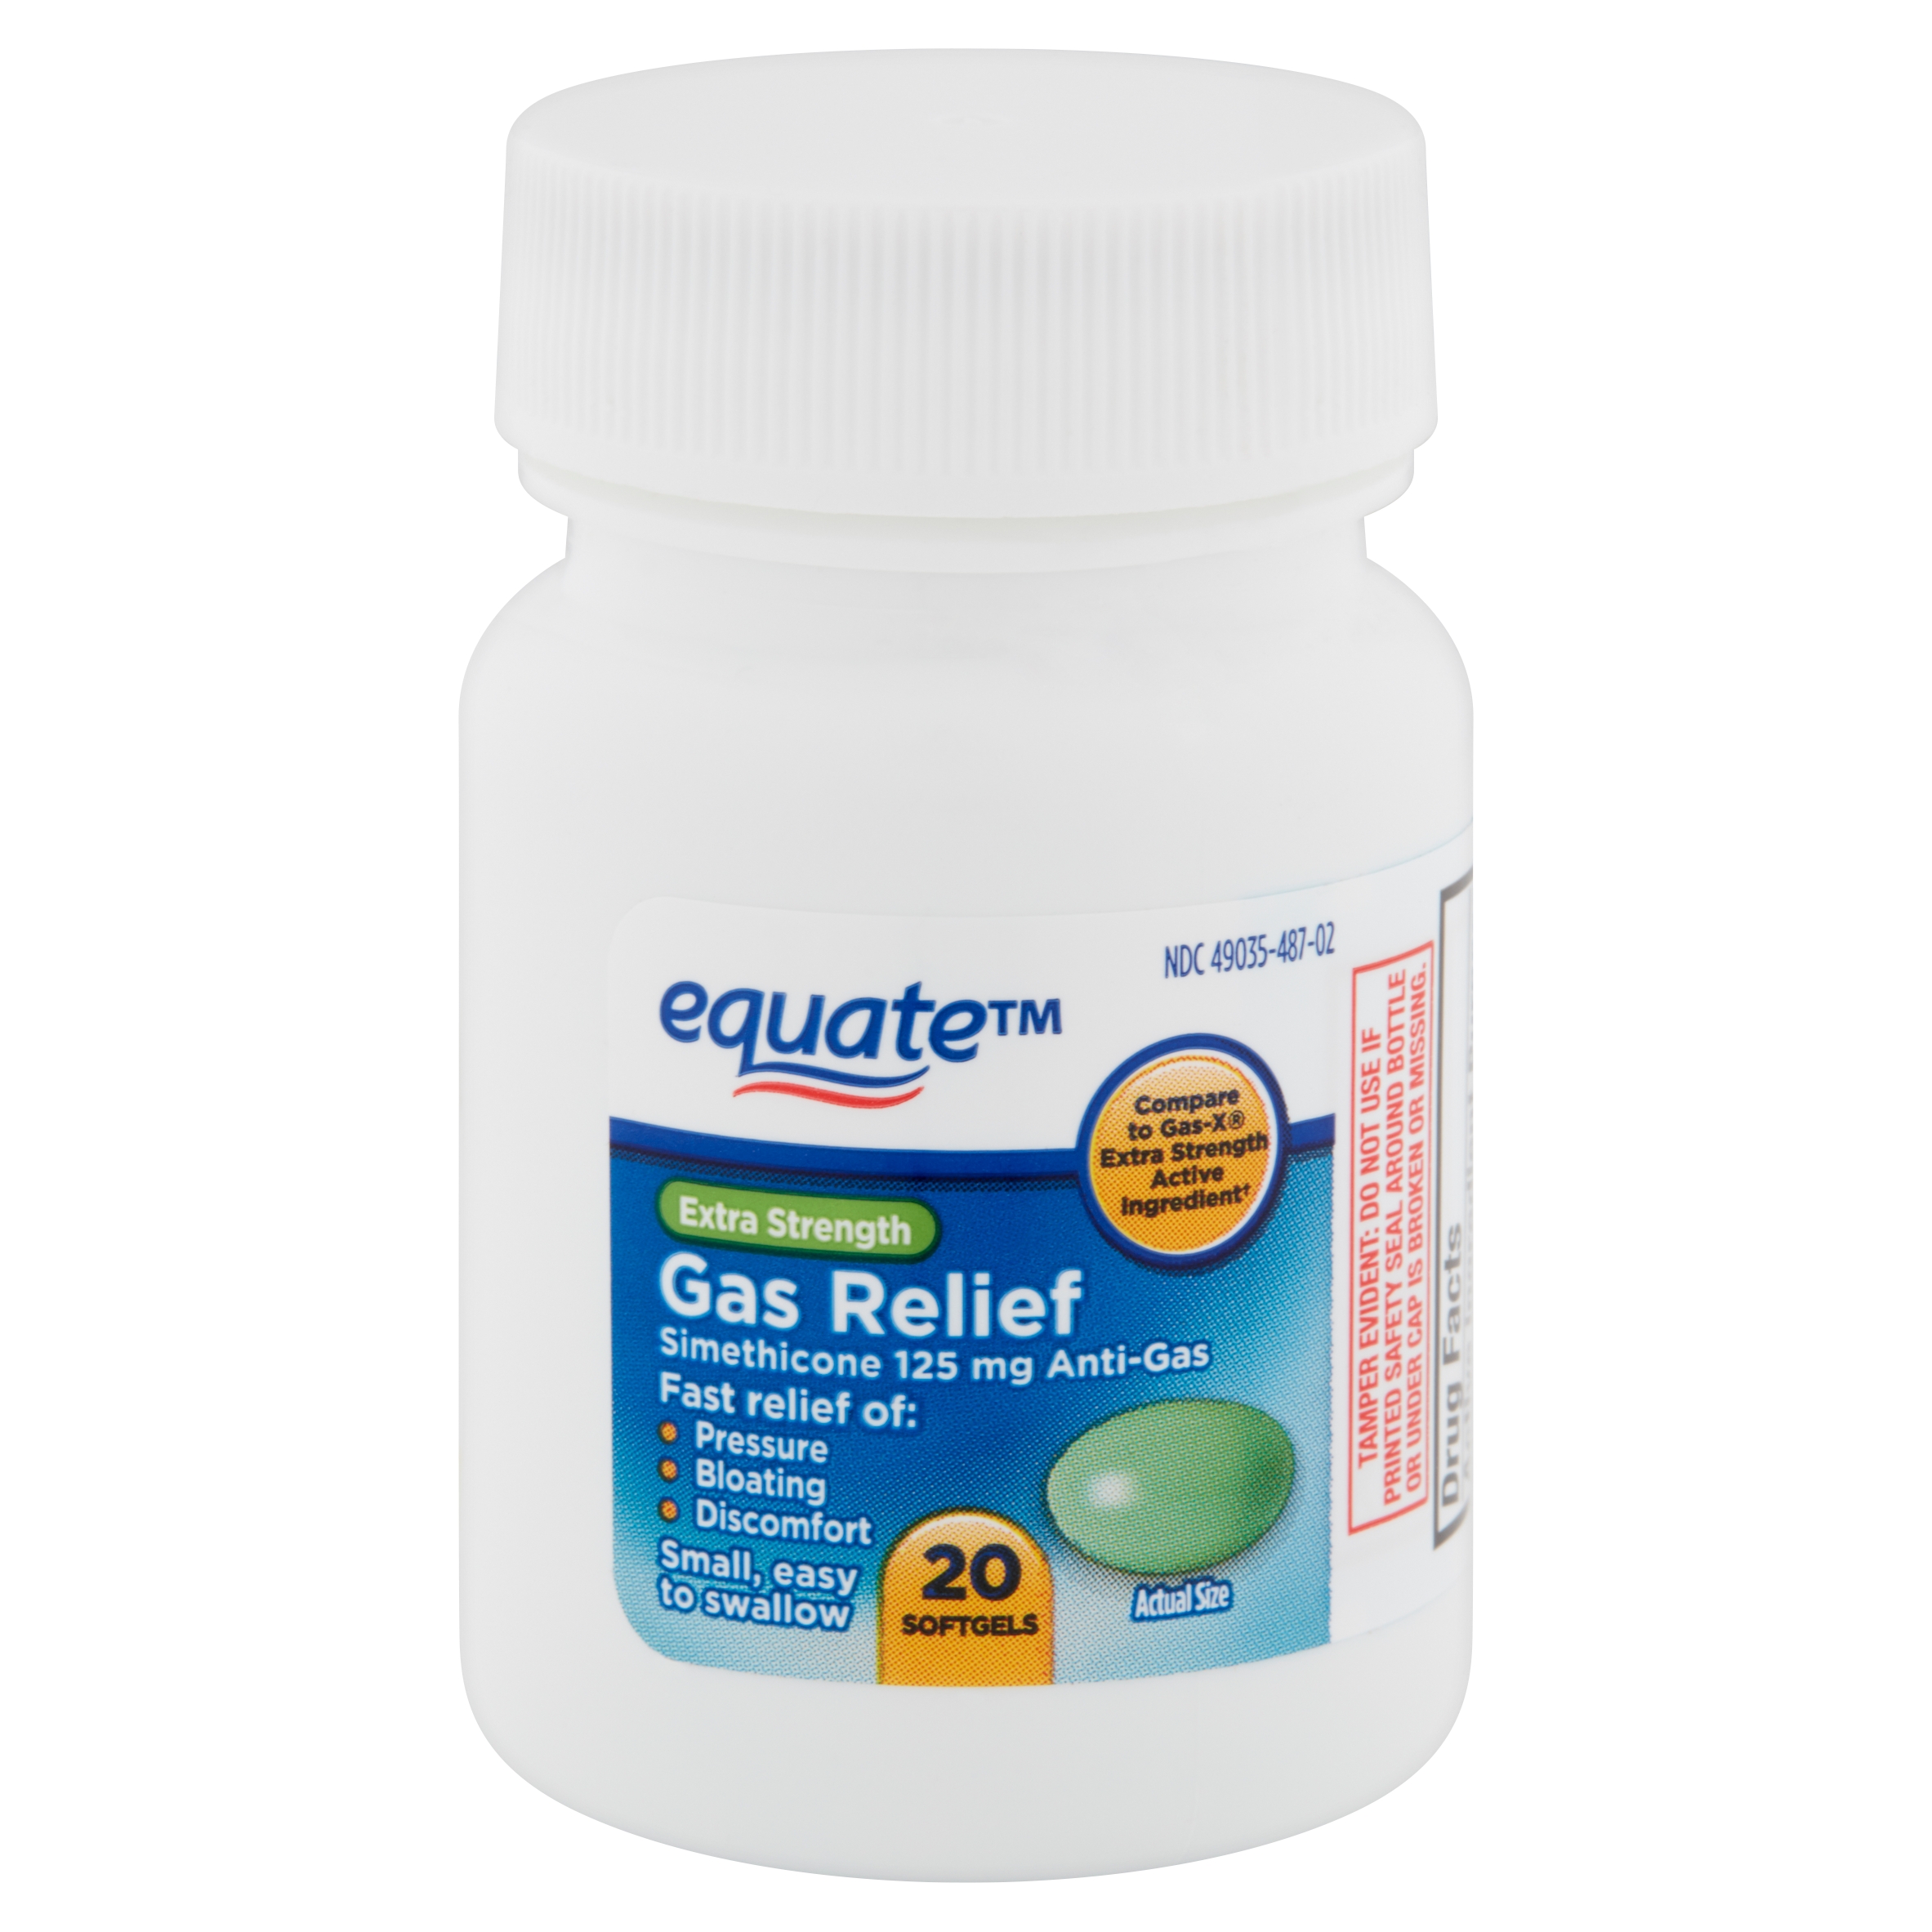 Equate Extra Strength Gas Relief Soft gels, 20 Count - image 1 of 11